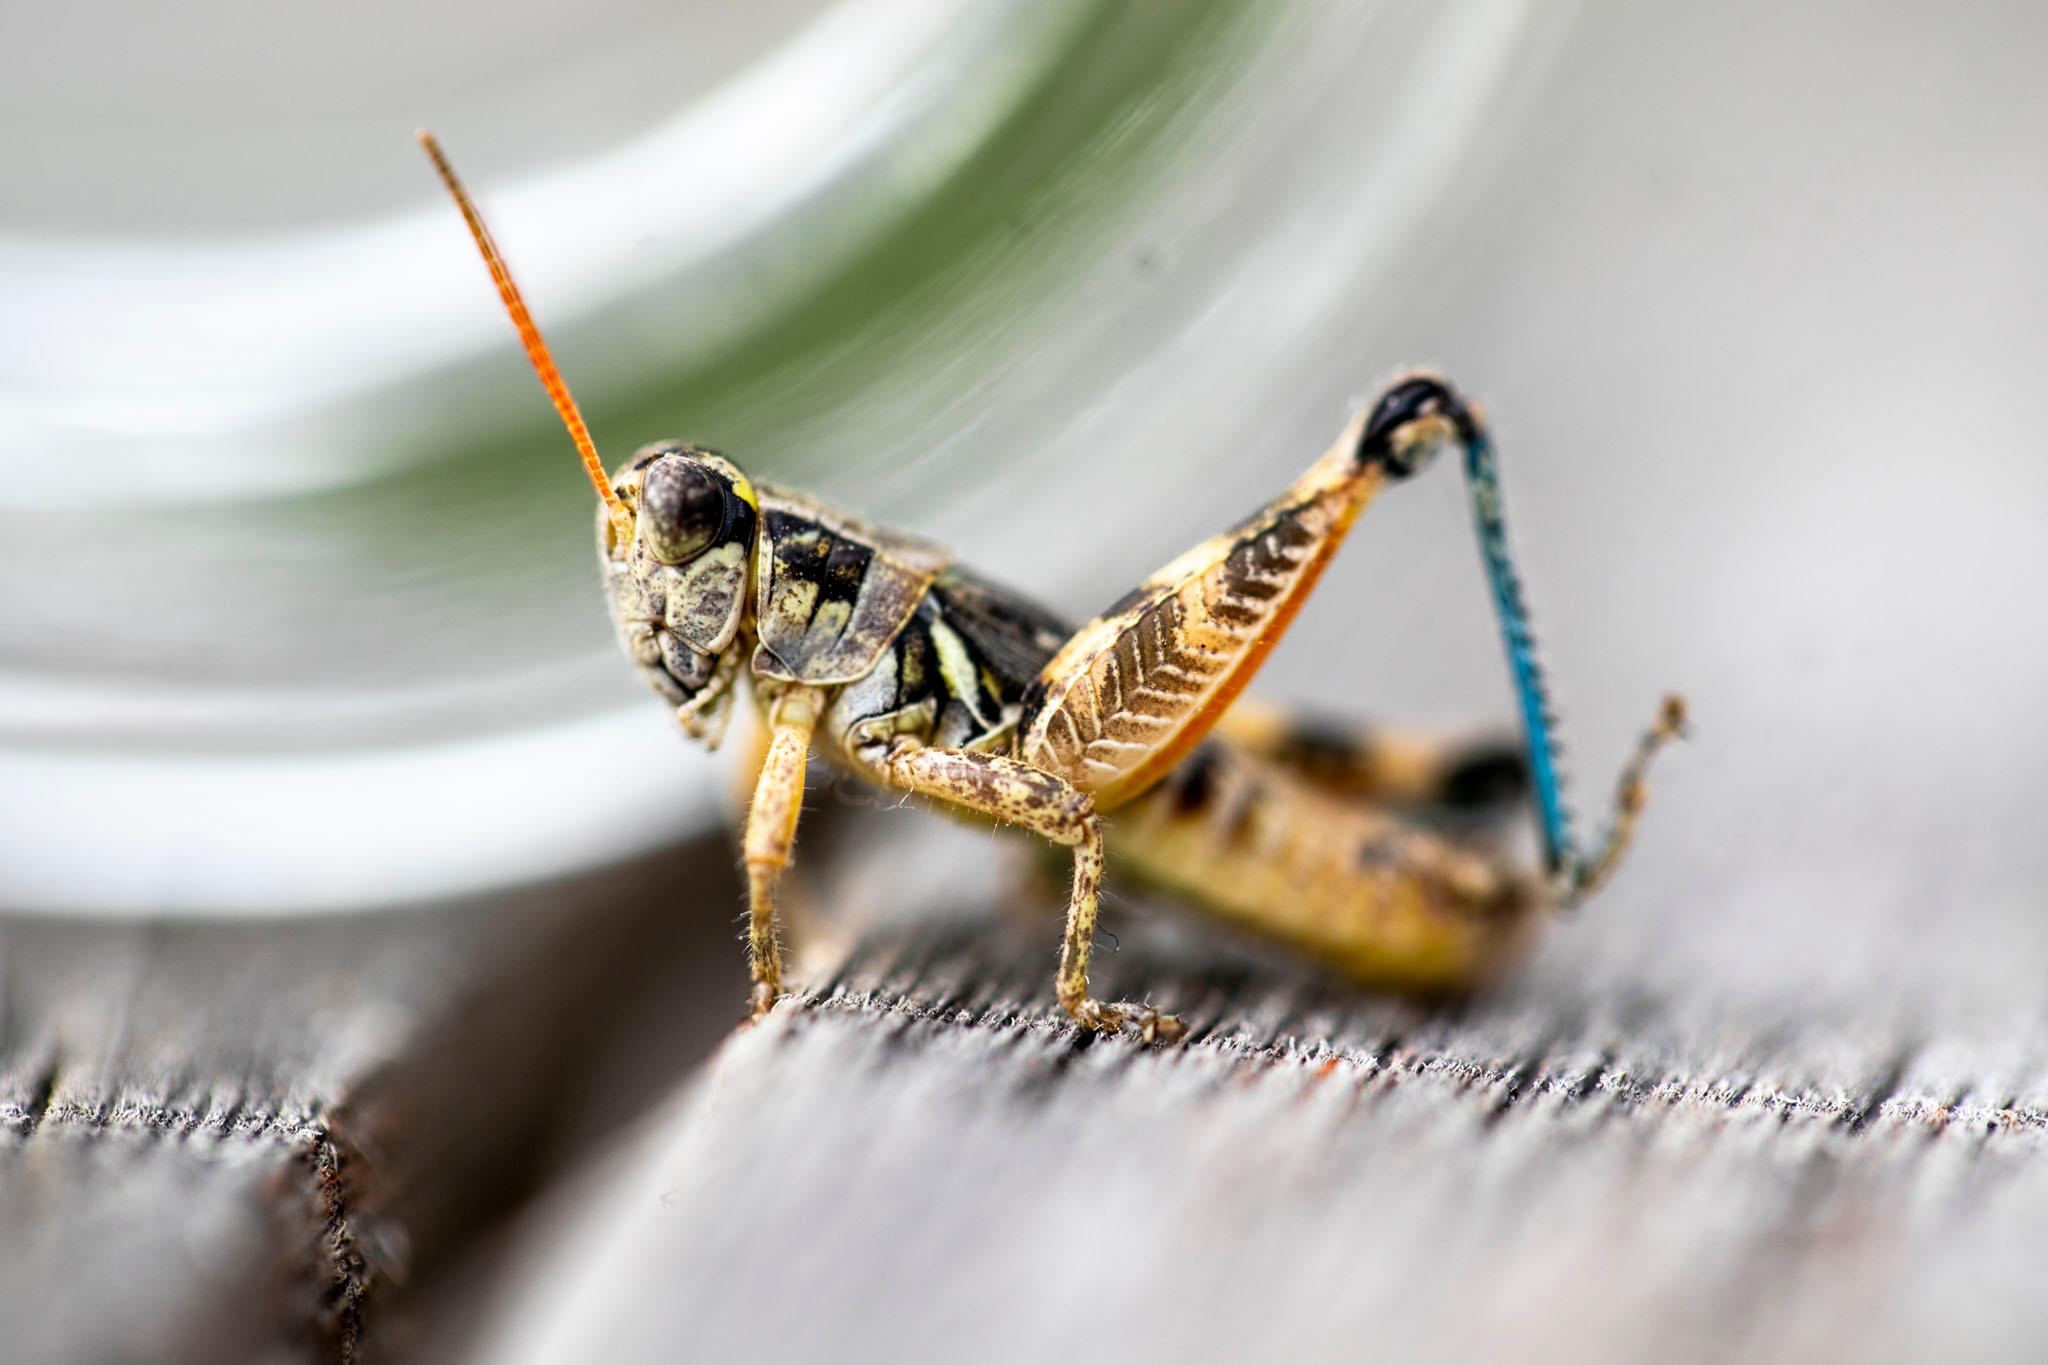 A close-up of a grasshopper, it's mostly colored in yellow and orange hues, with an electric blue streak down its legs.